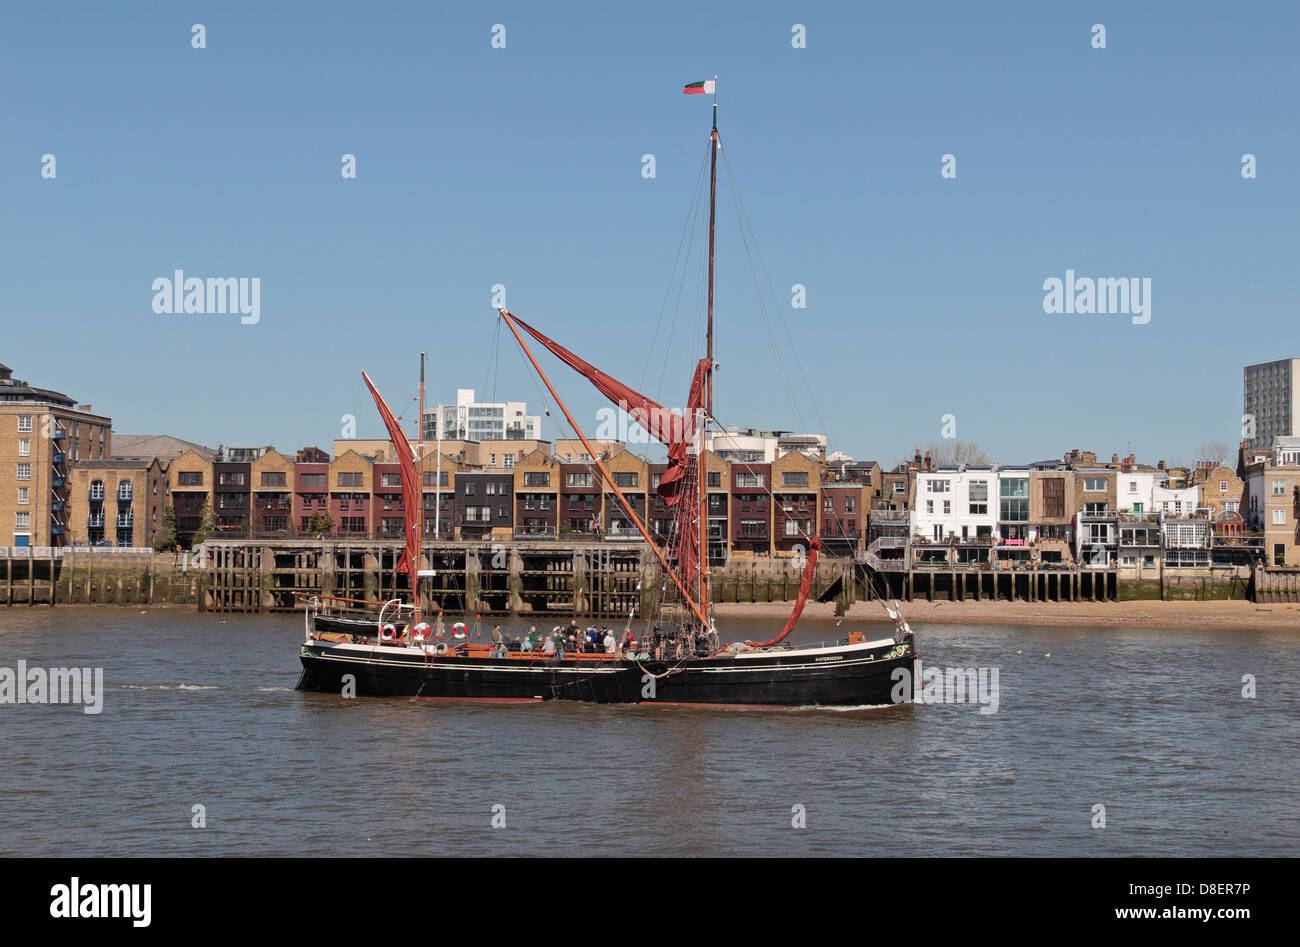 The SB (sailing barge) 'Hydrogen' sailing on the River Thames, London, UK. Stock Photo